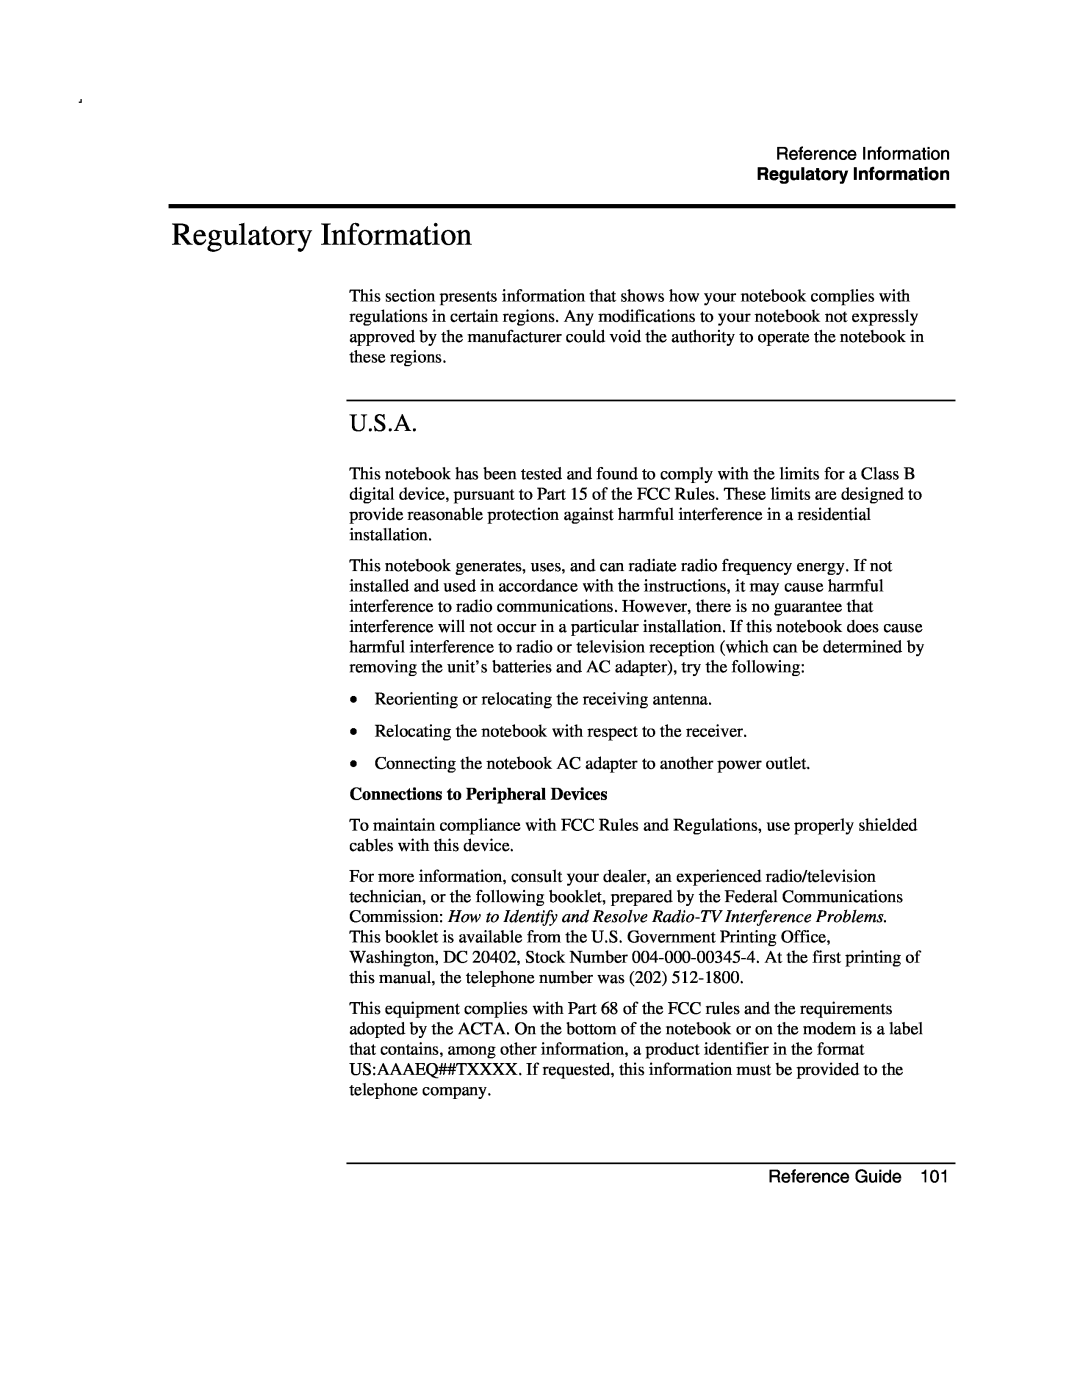 Compaq AMC20493-KT5 manual Regulatory Information, U.S.A, Connections to Peripheral Devices 